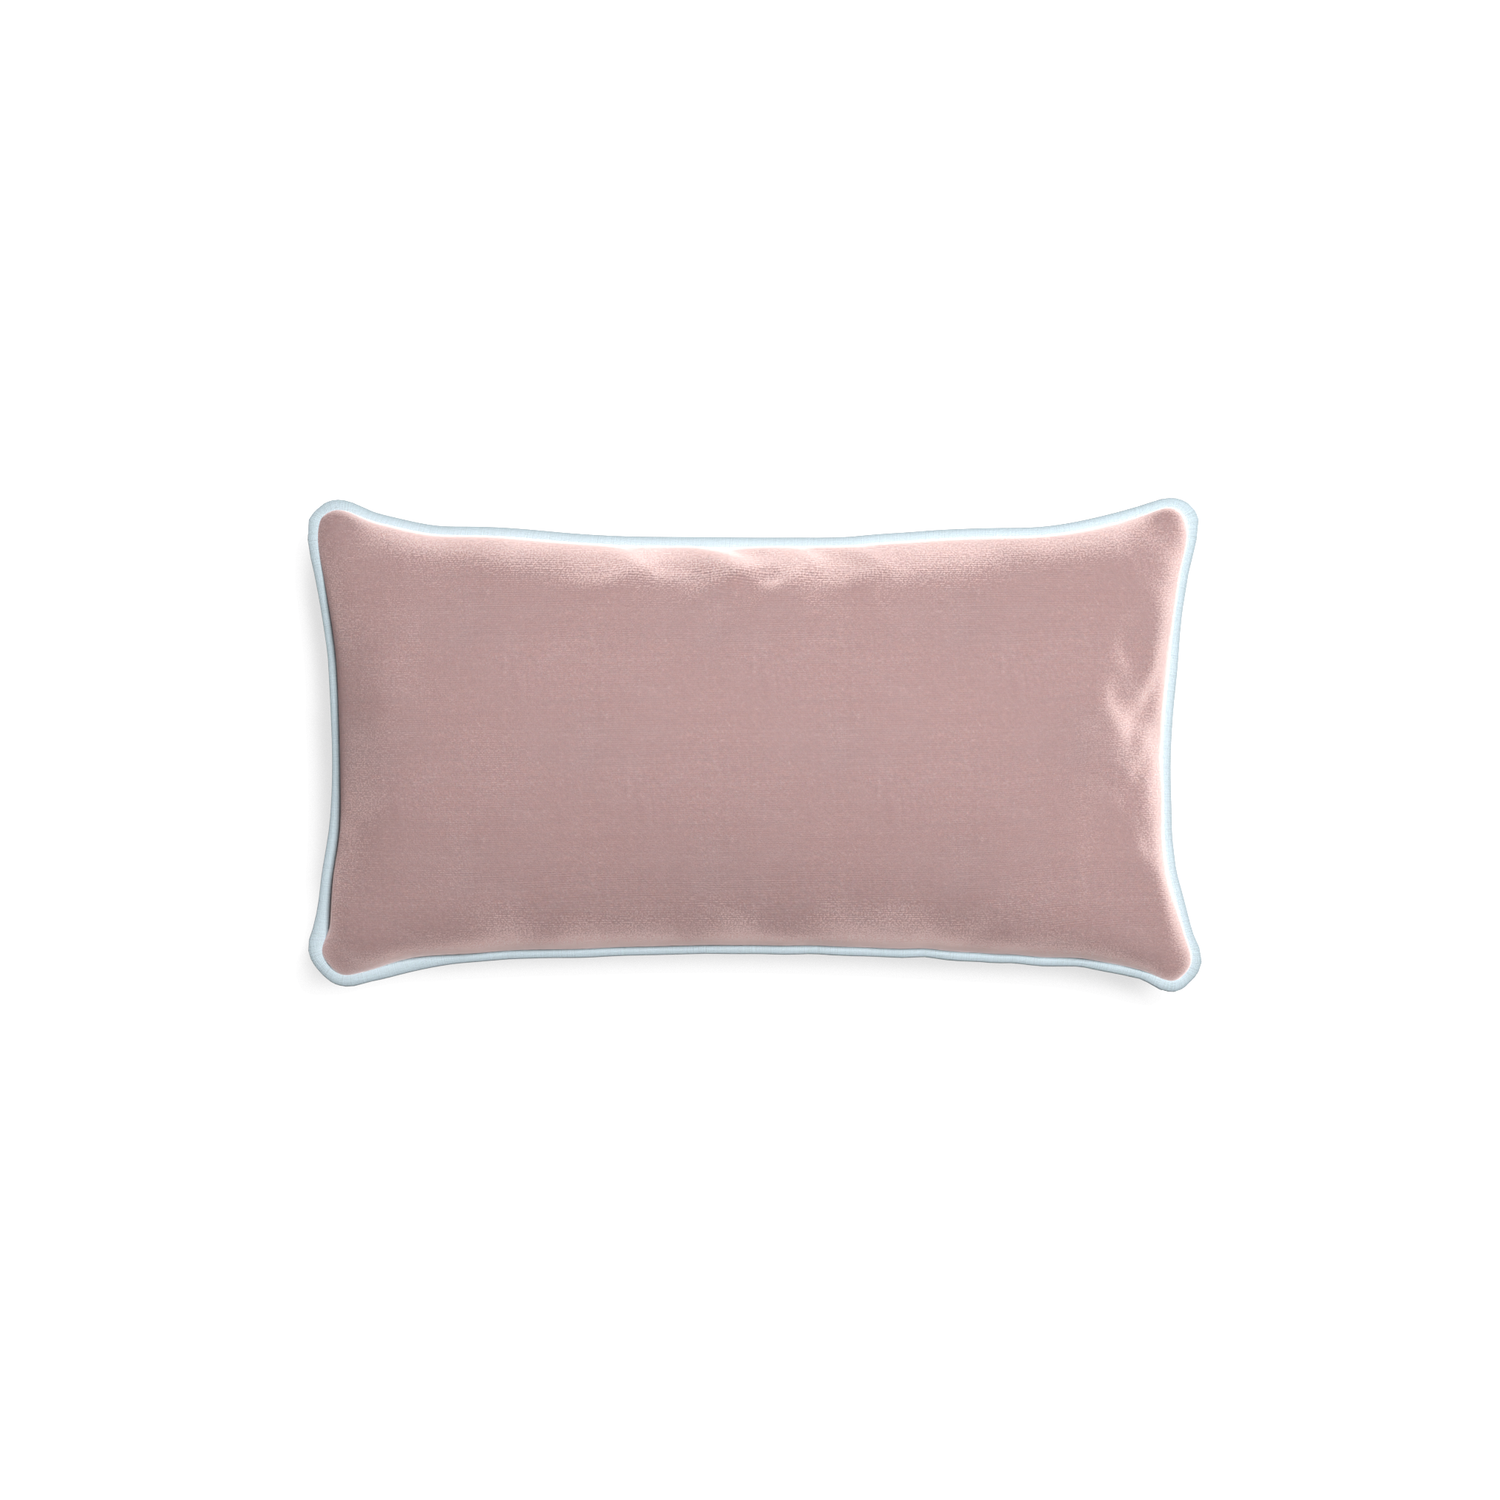 rectangle mauve velvet pillow with light blue piping